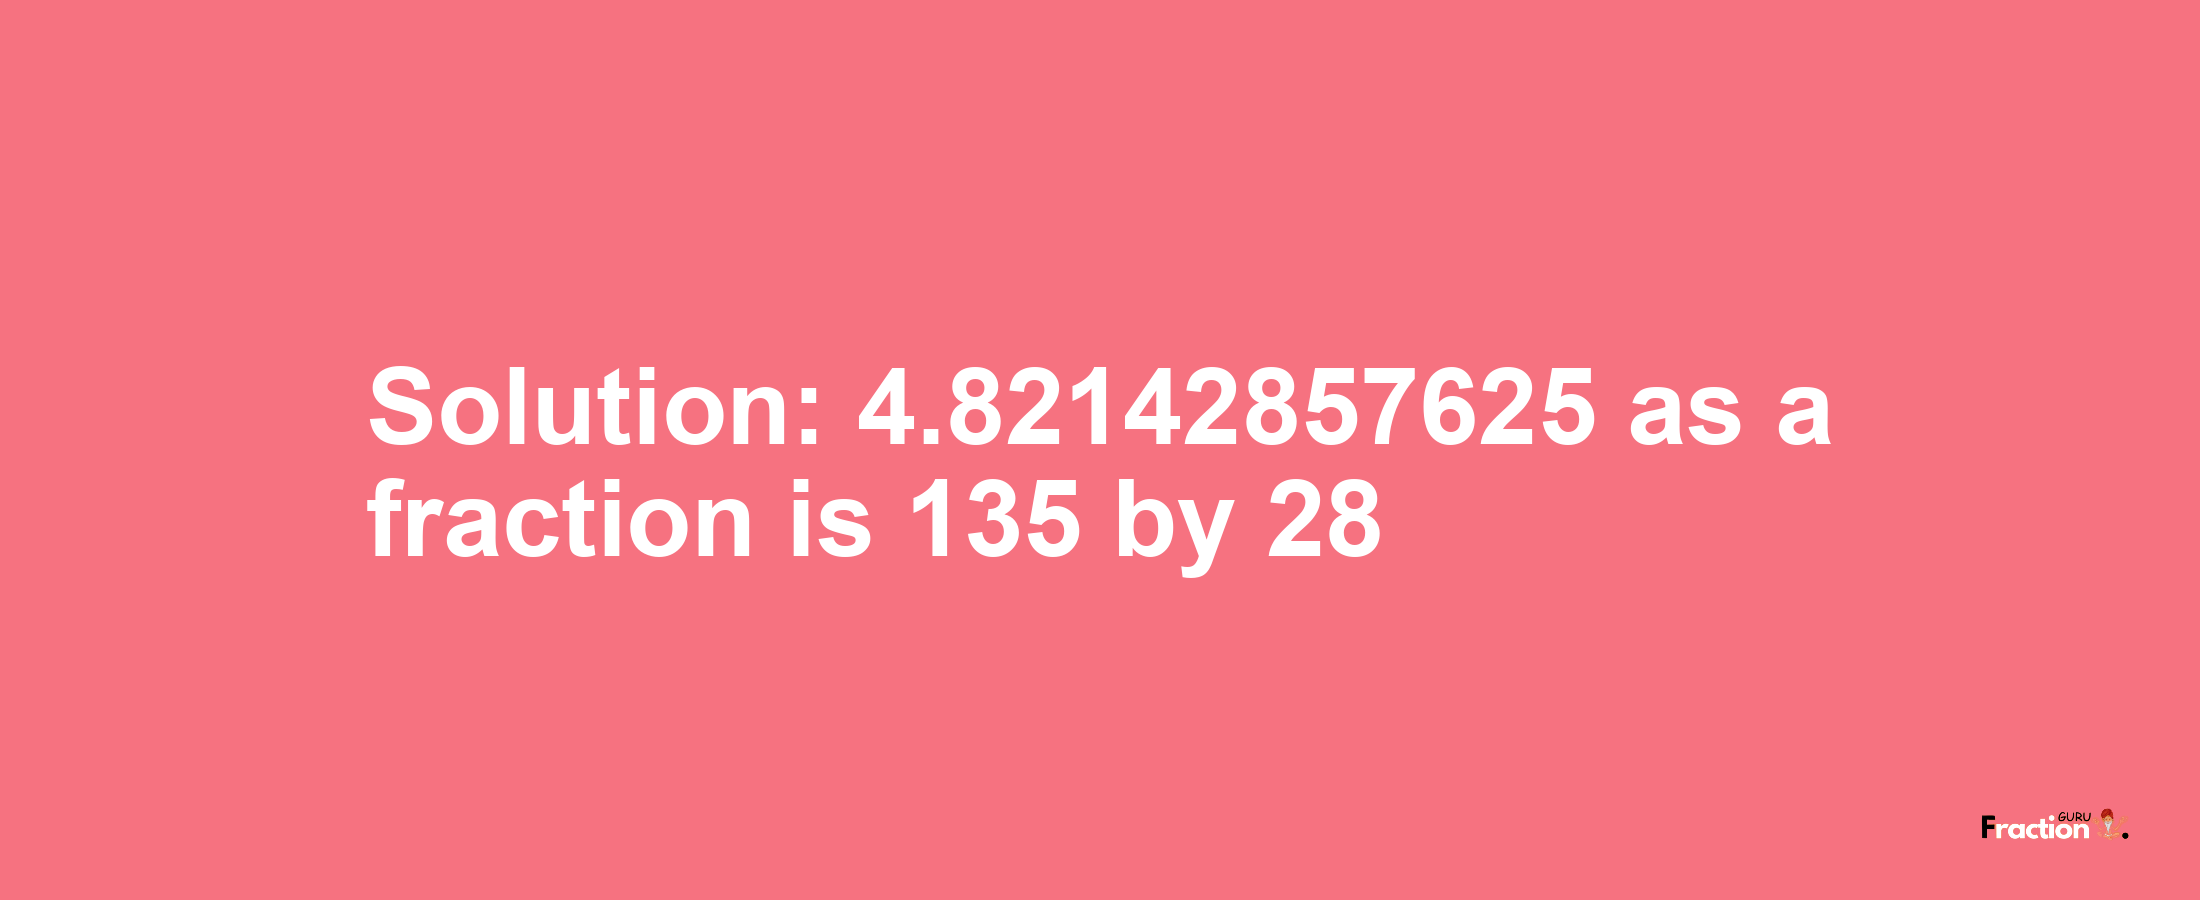 Solution:4.82142857625 as a fraction is 135/28